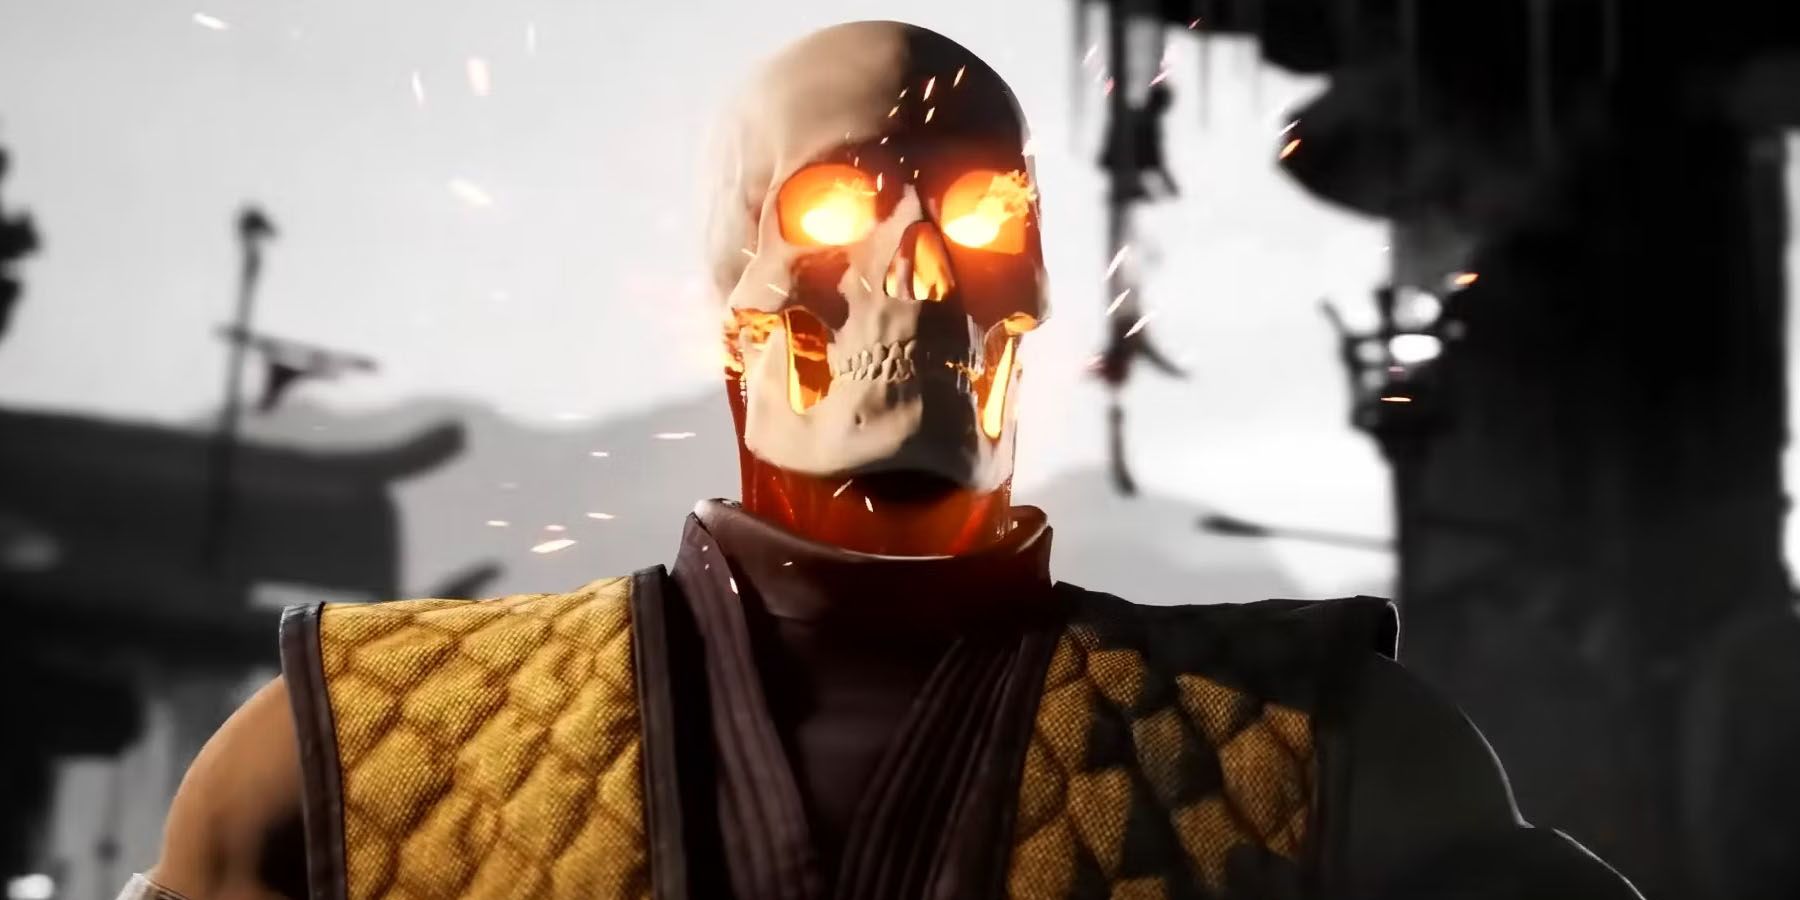 A screenshot of Kameo Scorpion preparing to perform a Fatality with his flaming skull exposed in Mortal Kombat 1.